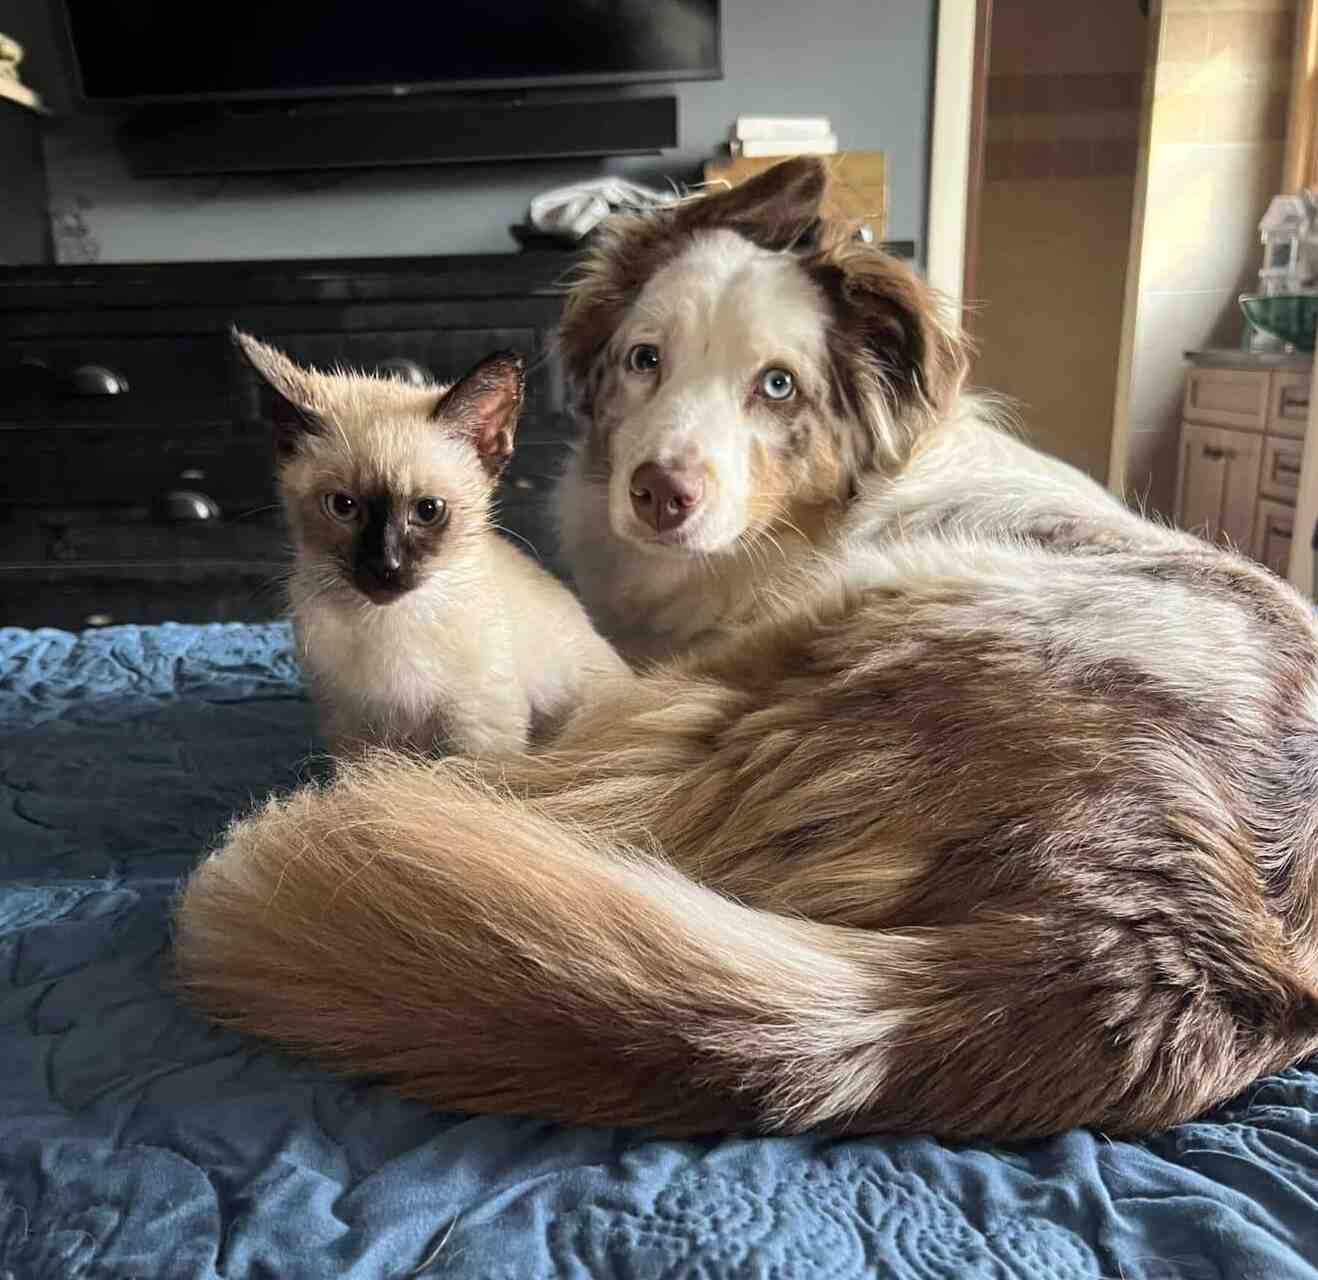 Photo of Stella the miniature Australian Shepherd for adoption in Michigan, cuddled up with her best friend a Siamese kitten